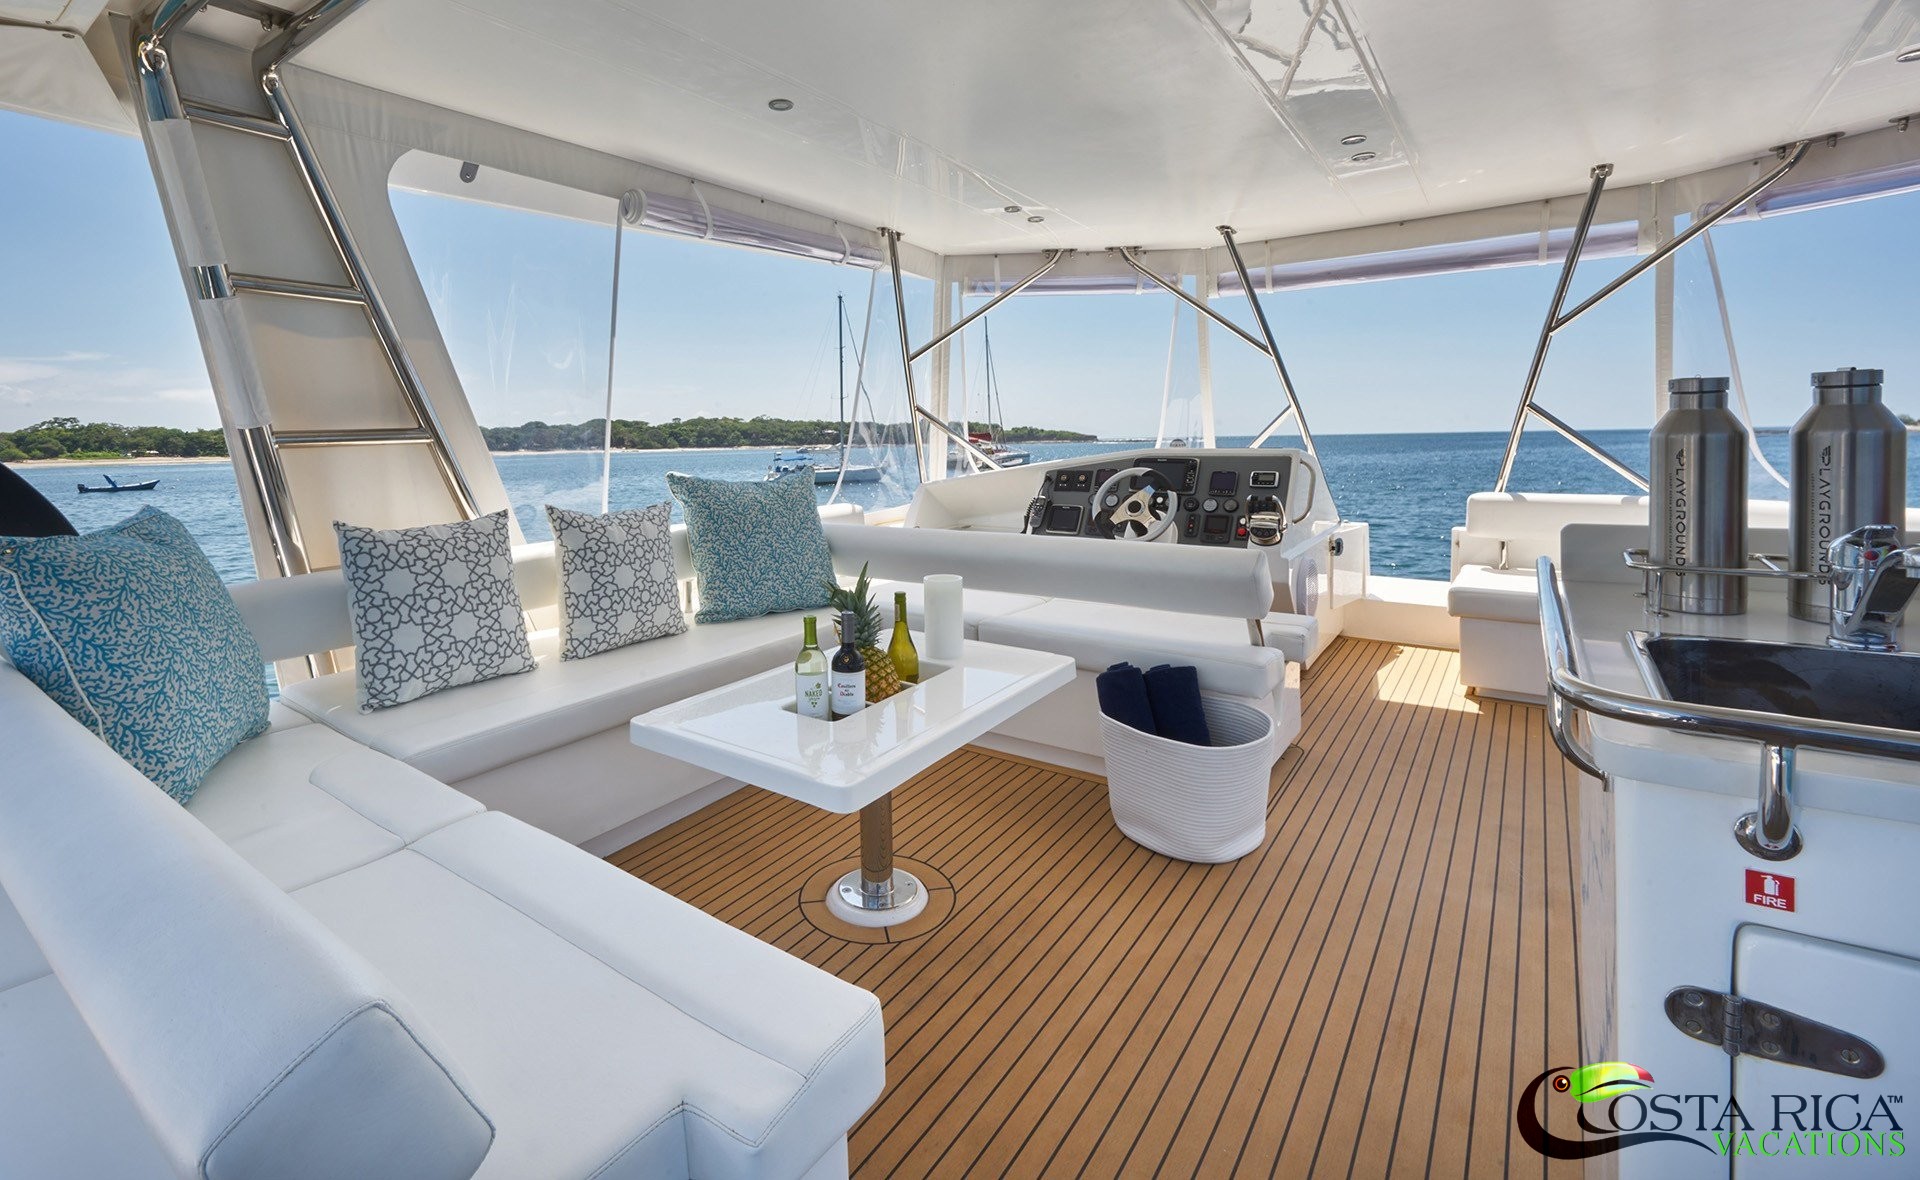 This is Playgrounds Yacht deluxe surf trip.